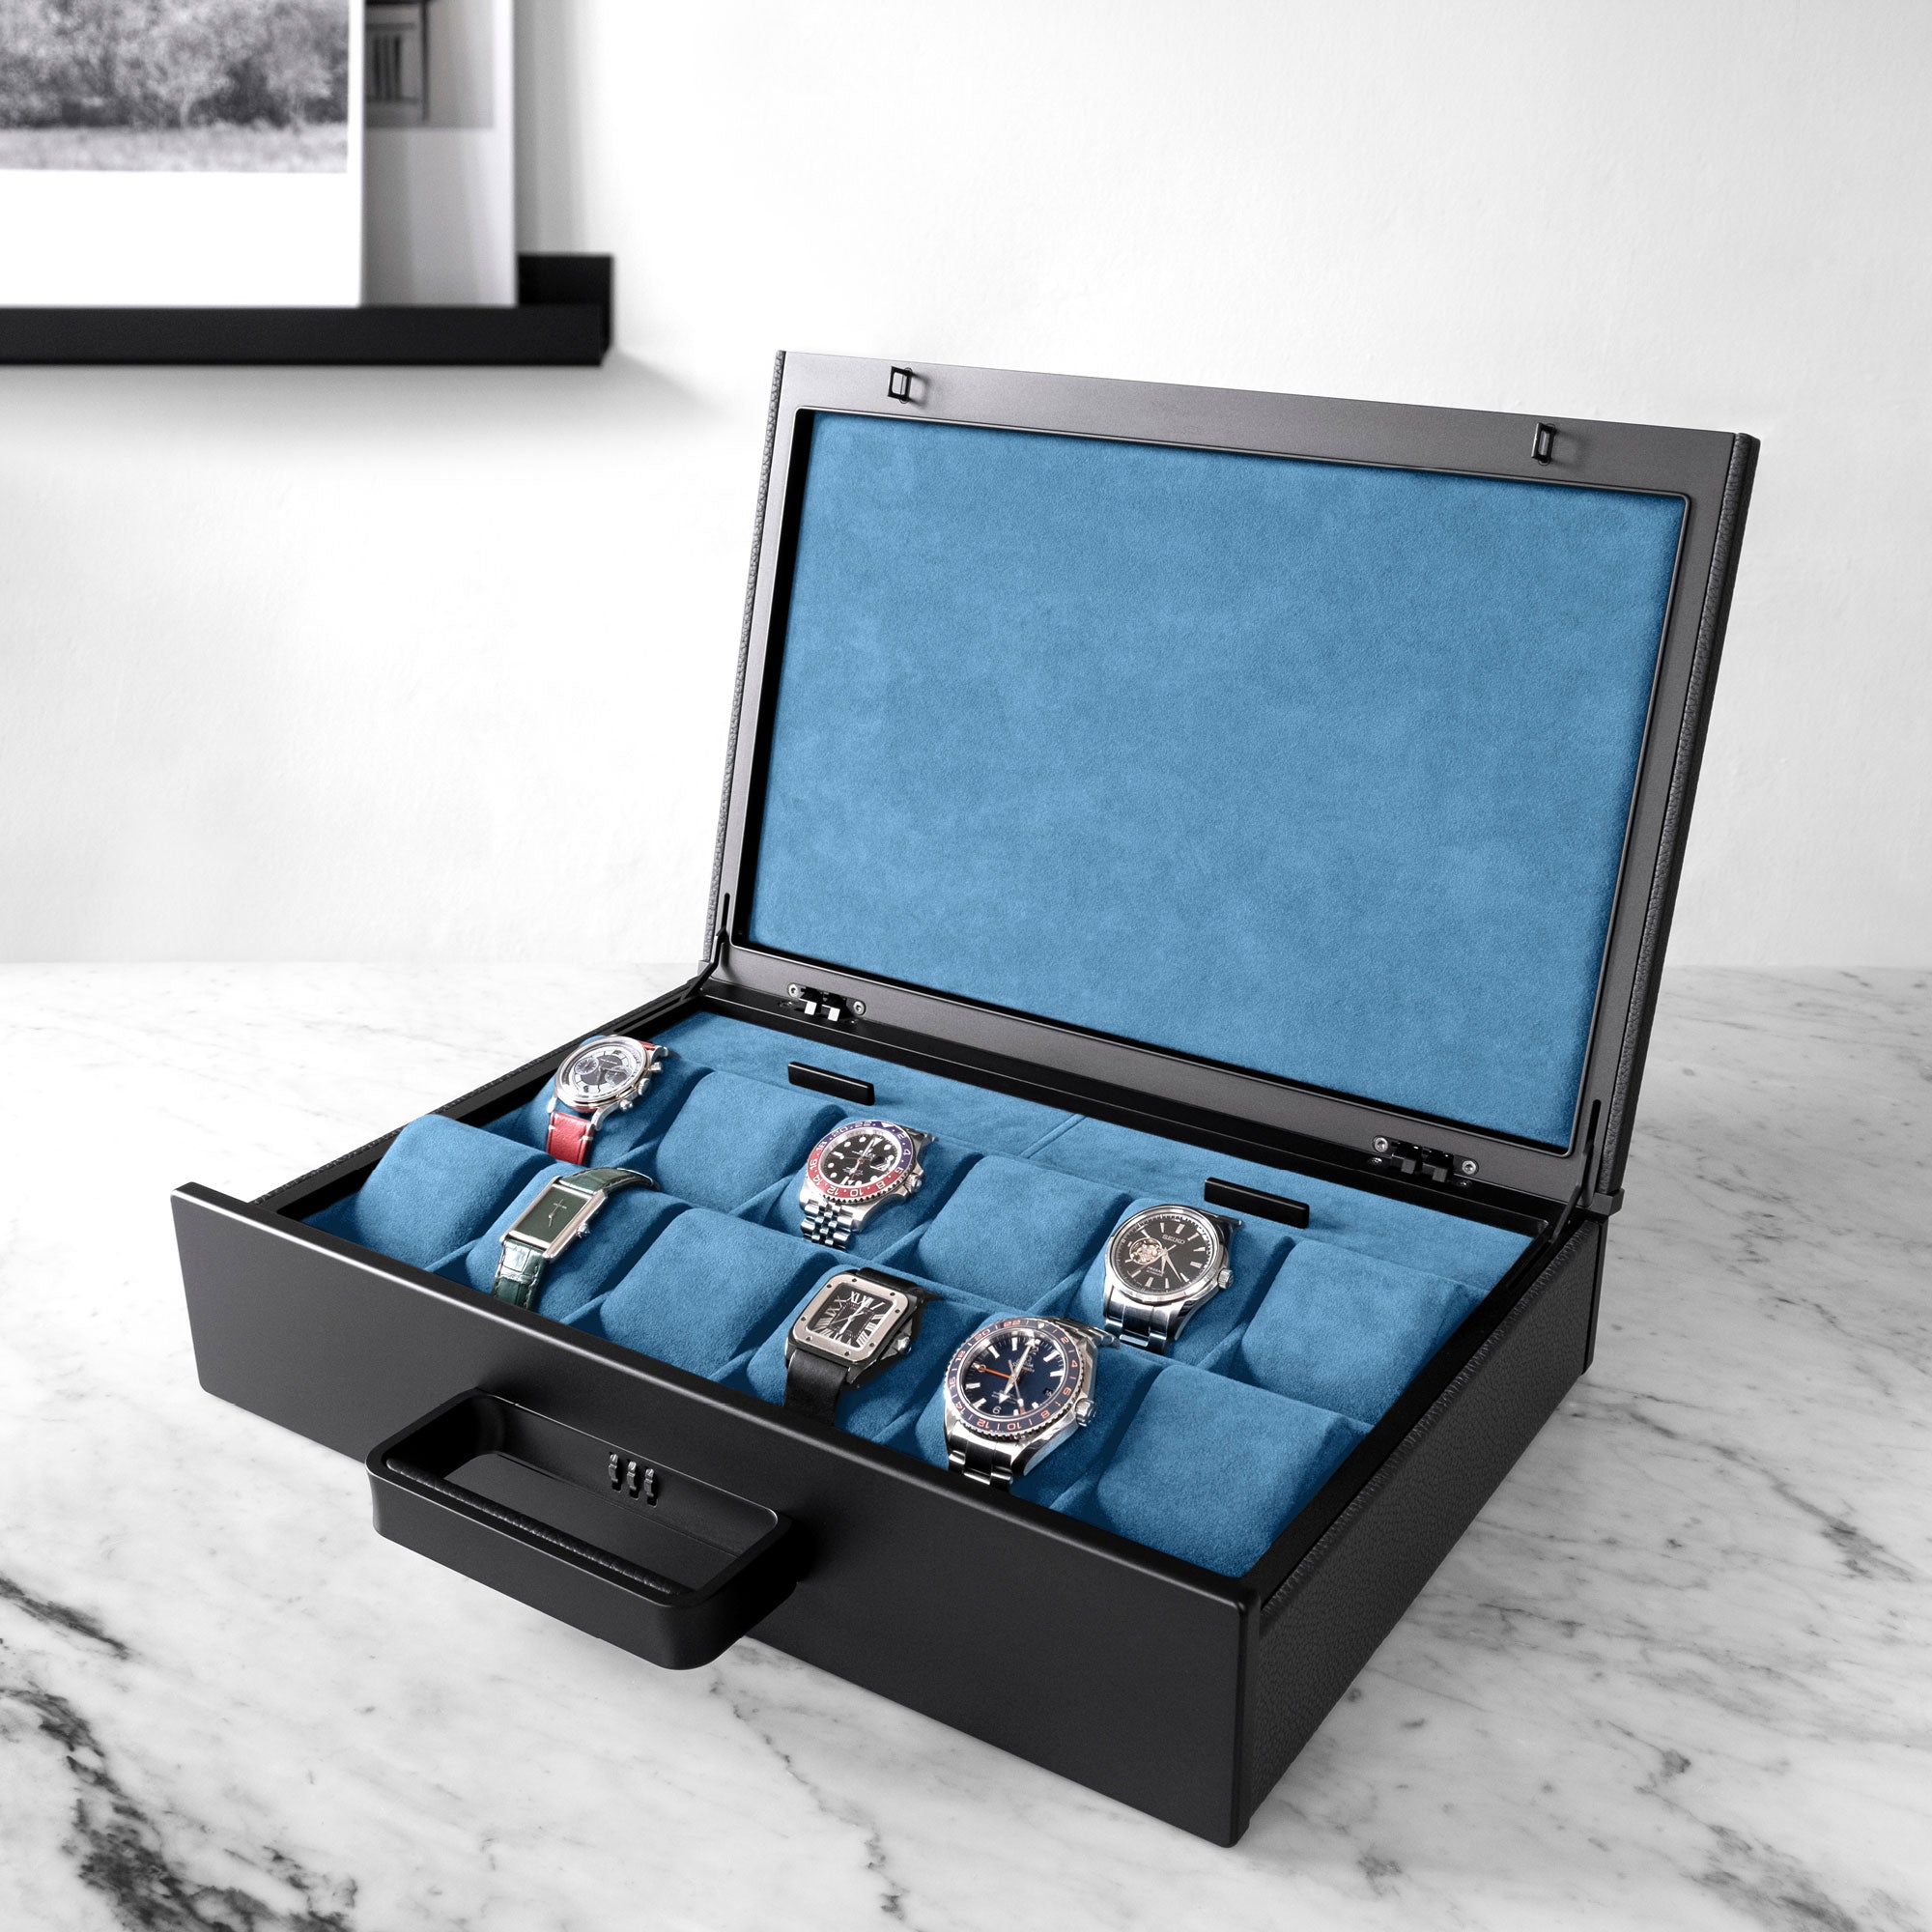 Product photo of open Mackenzie 12 Watch briefcase in black leather, black aluminum and sky blue Alcantara interior